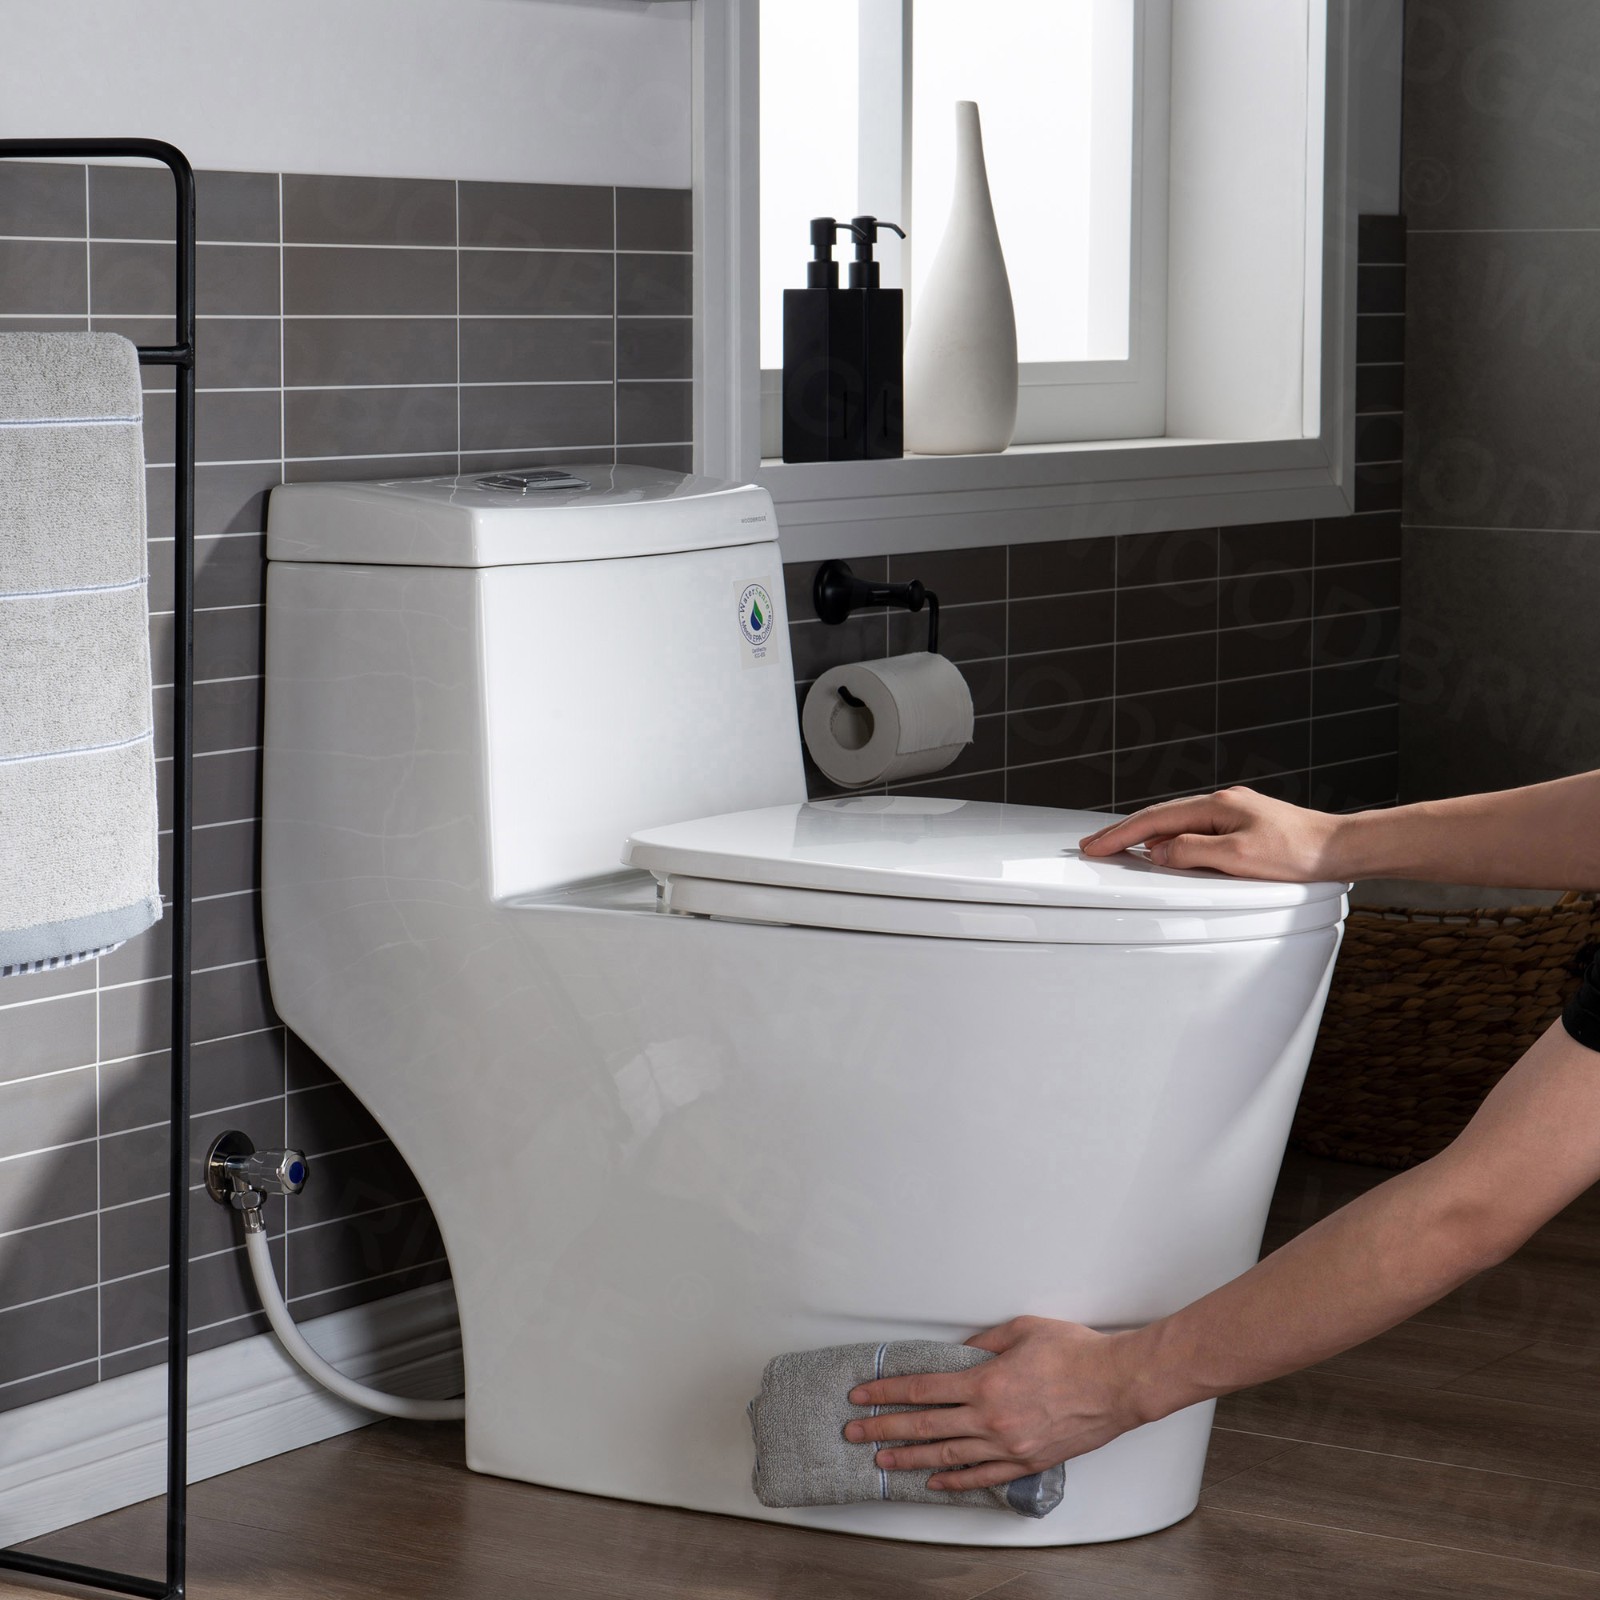  WOODBRIDGE B-0940-A Modern One-Piece Elongated toilet with Solf Closed Seat and Hand Free Touchless Sensor Flush Kit, White_5444